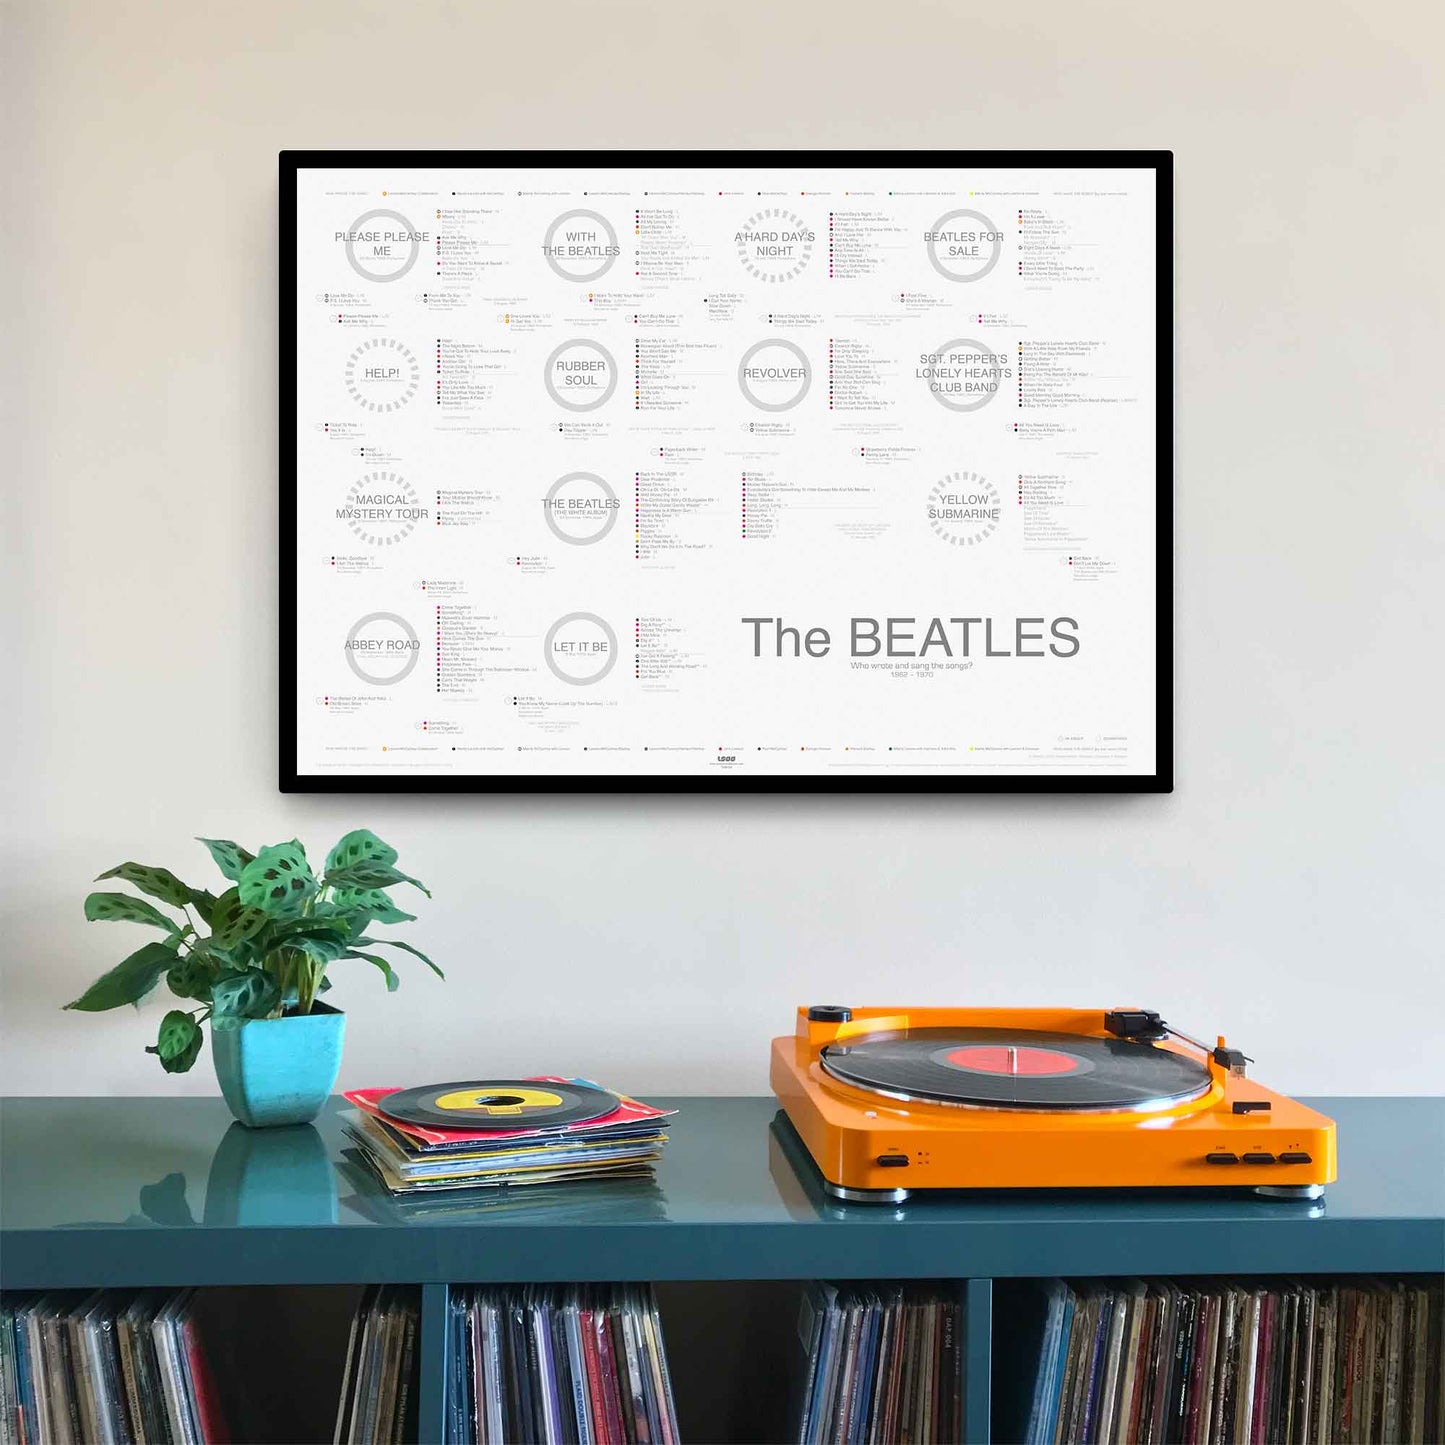 The Beatles' Discography: A Visual Guide to Who Wrote and Sang the Songs